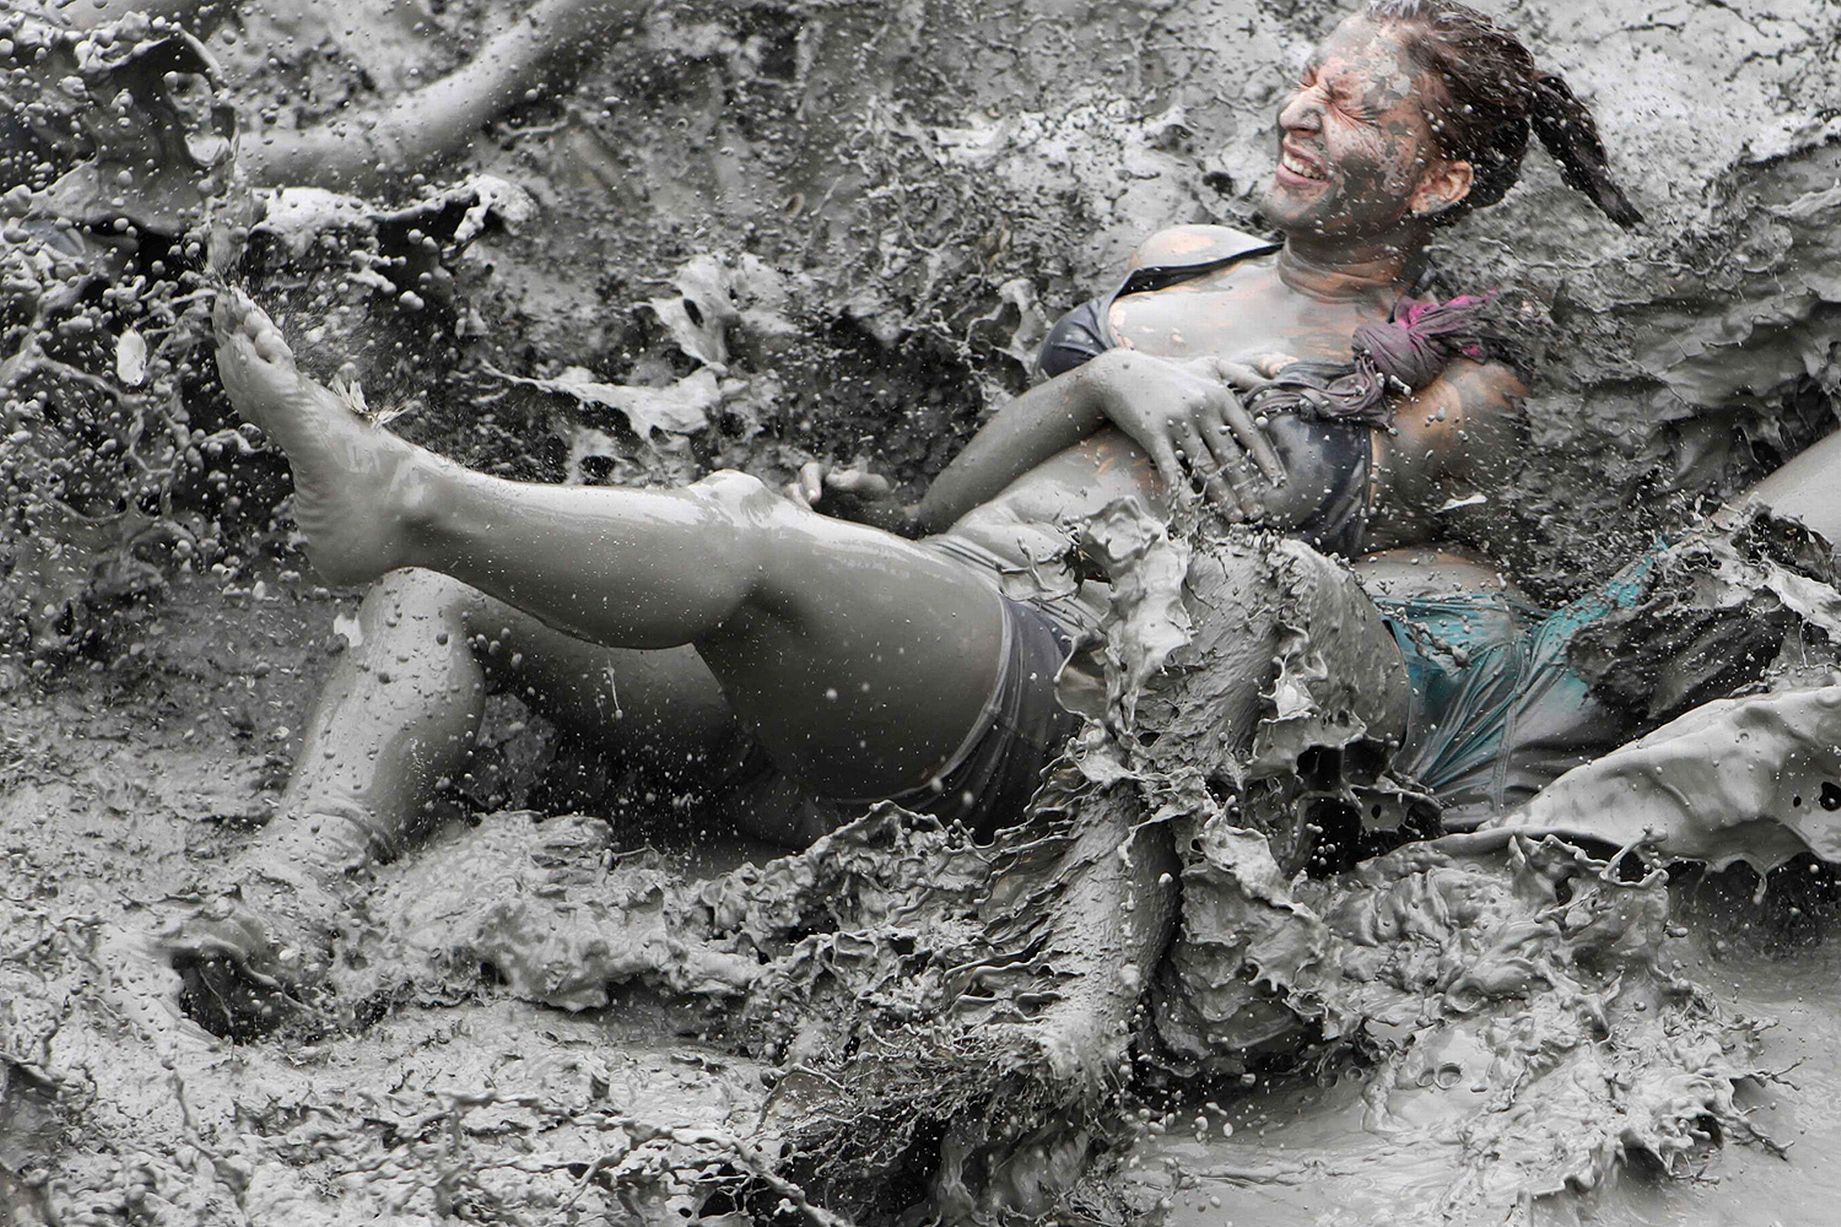 Tourists play in mud during the opening day of the Boryeong Mud Festival at Daecheon beach in Boryeong